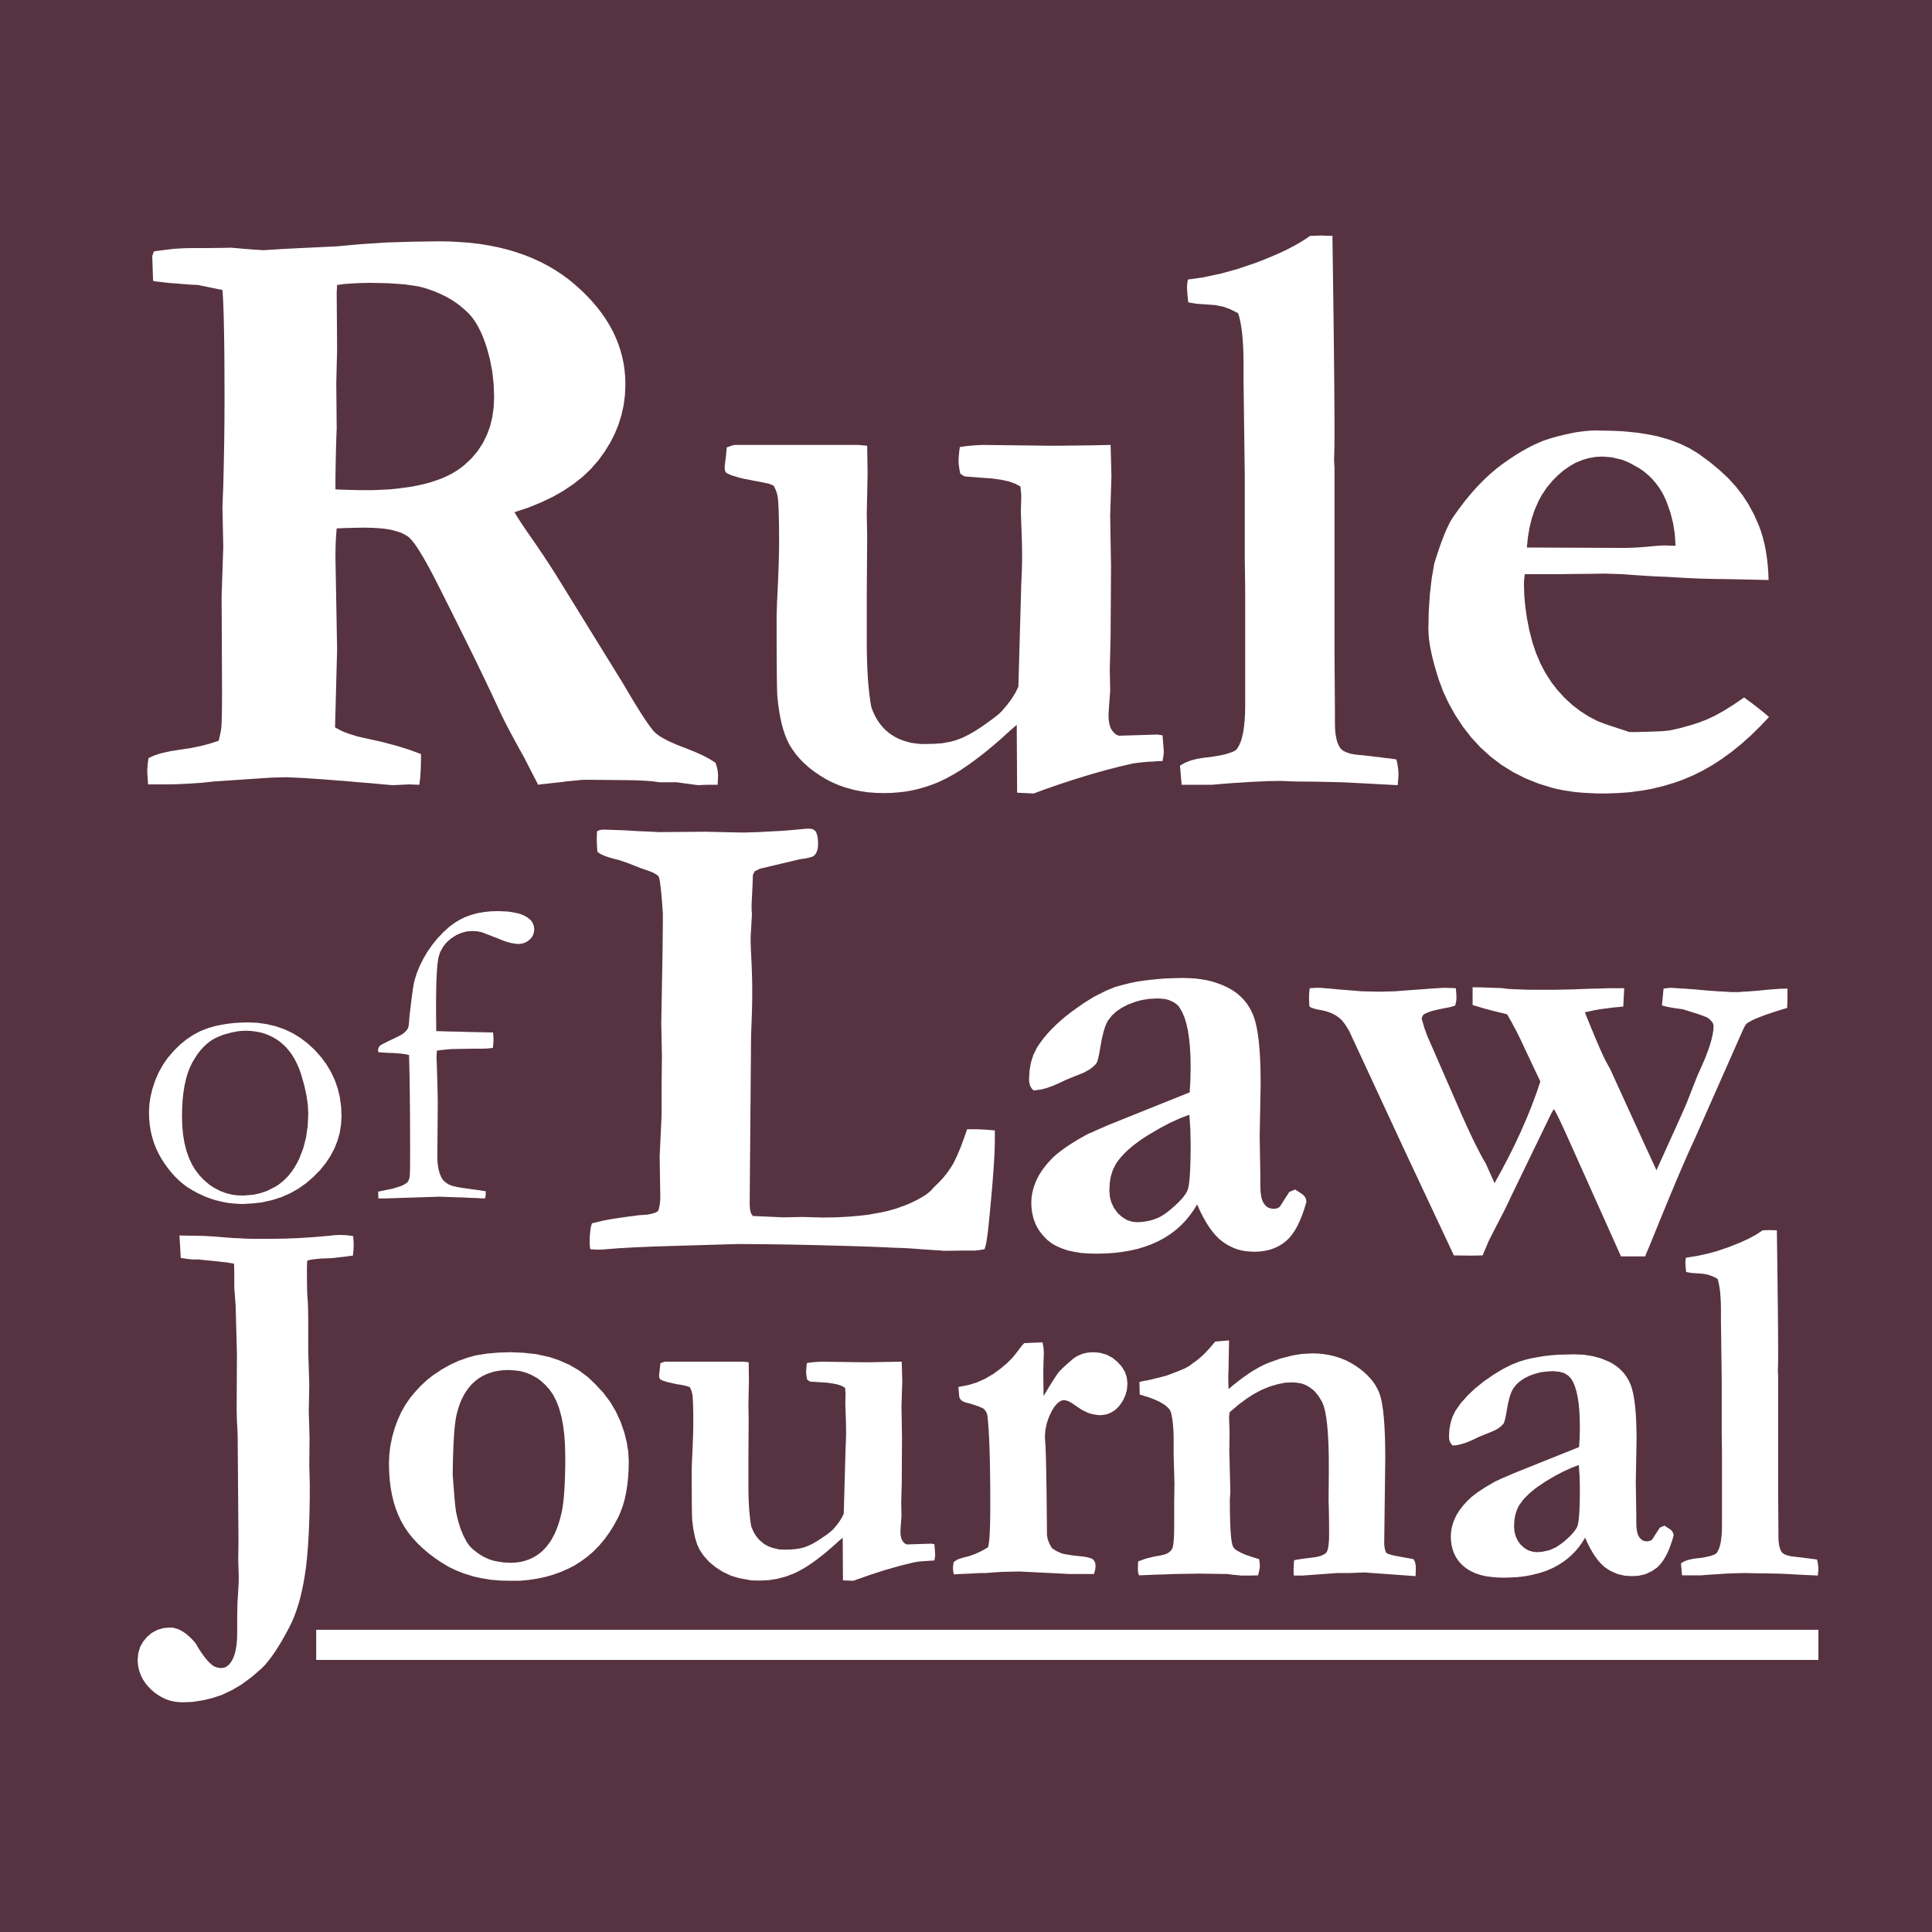 White text on a purple background reading "Rule of Law Journal"